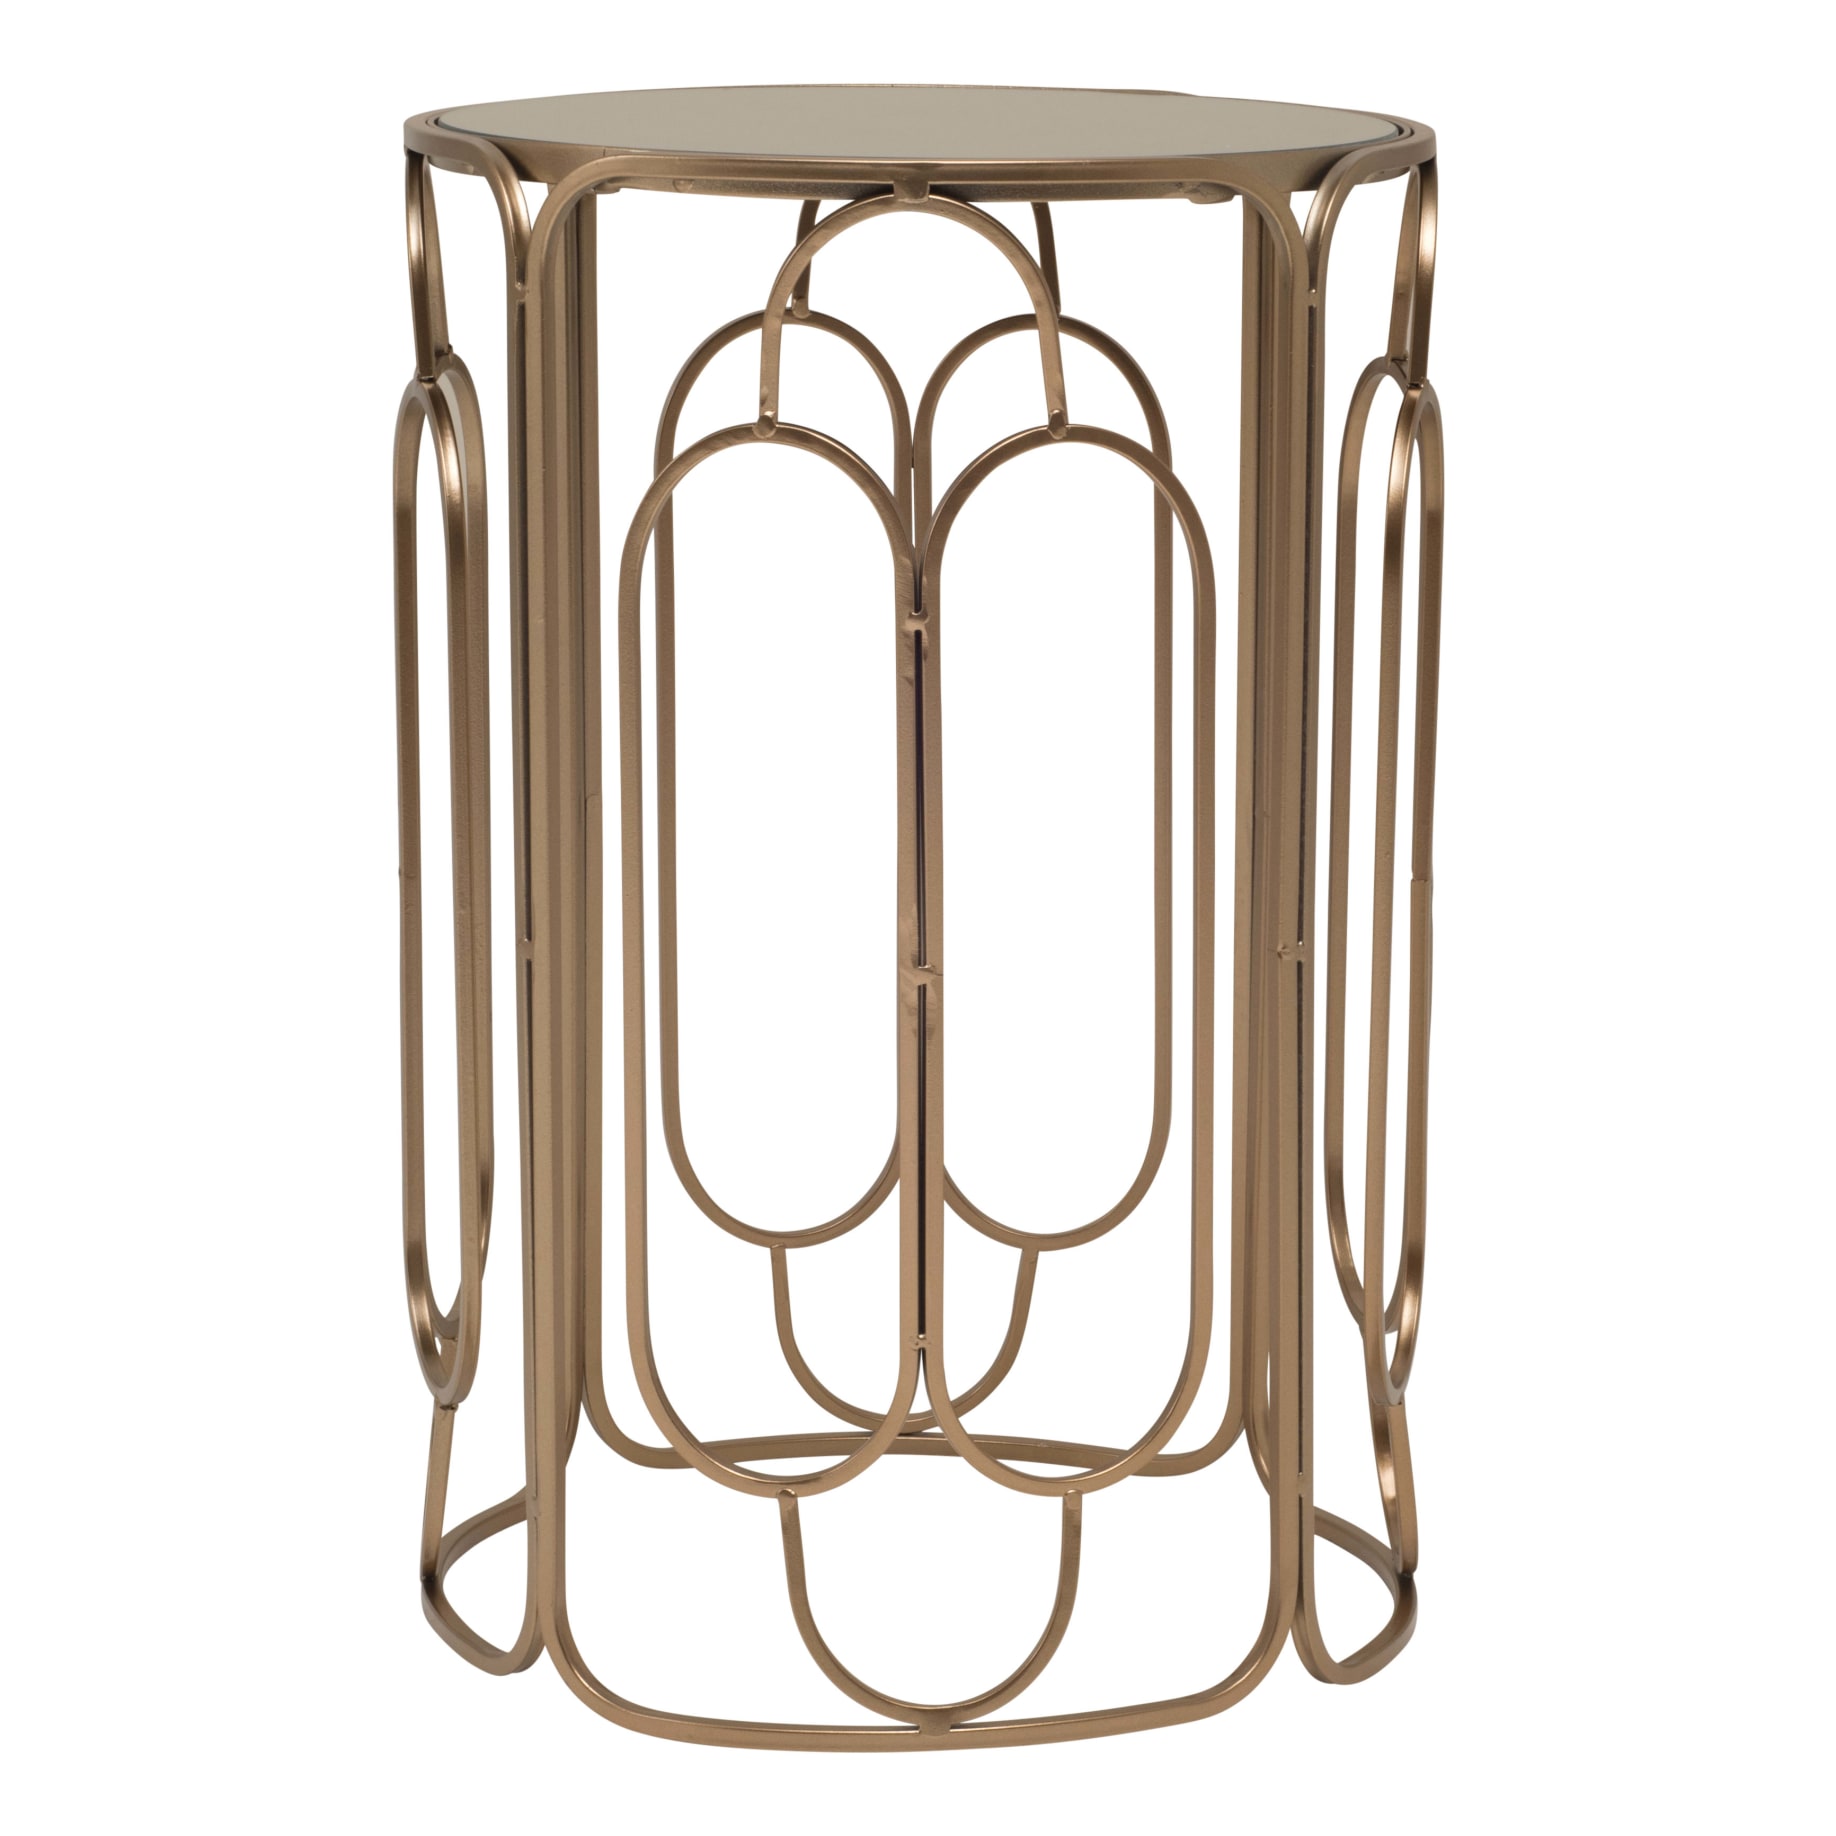 Celeste Round Side Table Low 36cm in Copper Gold / Mirror